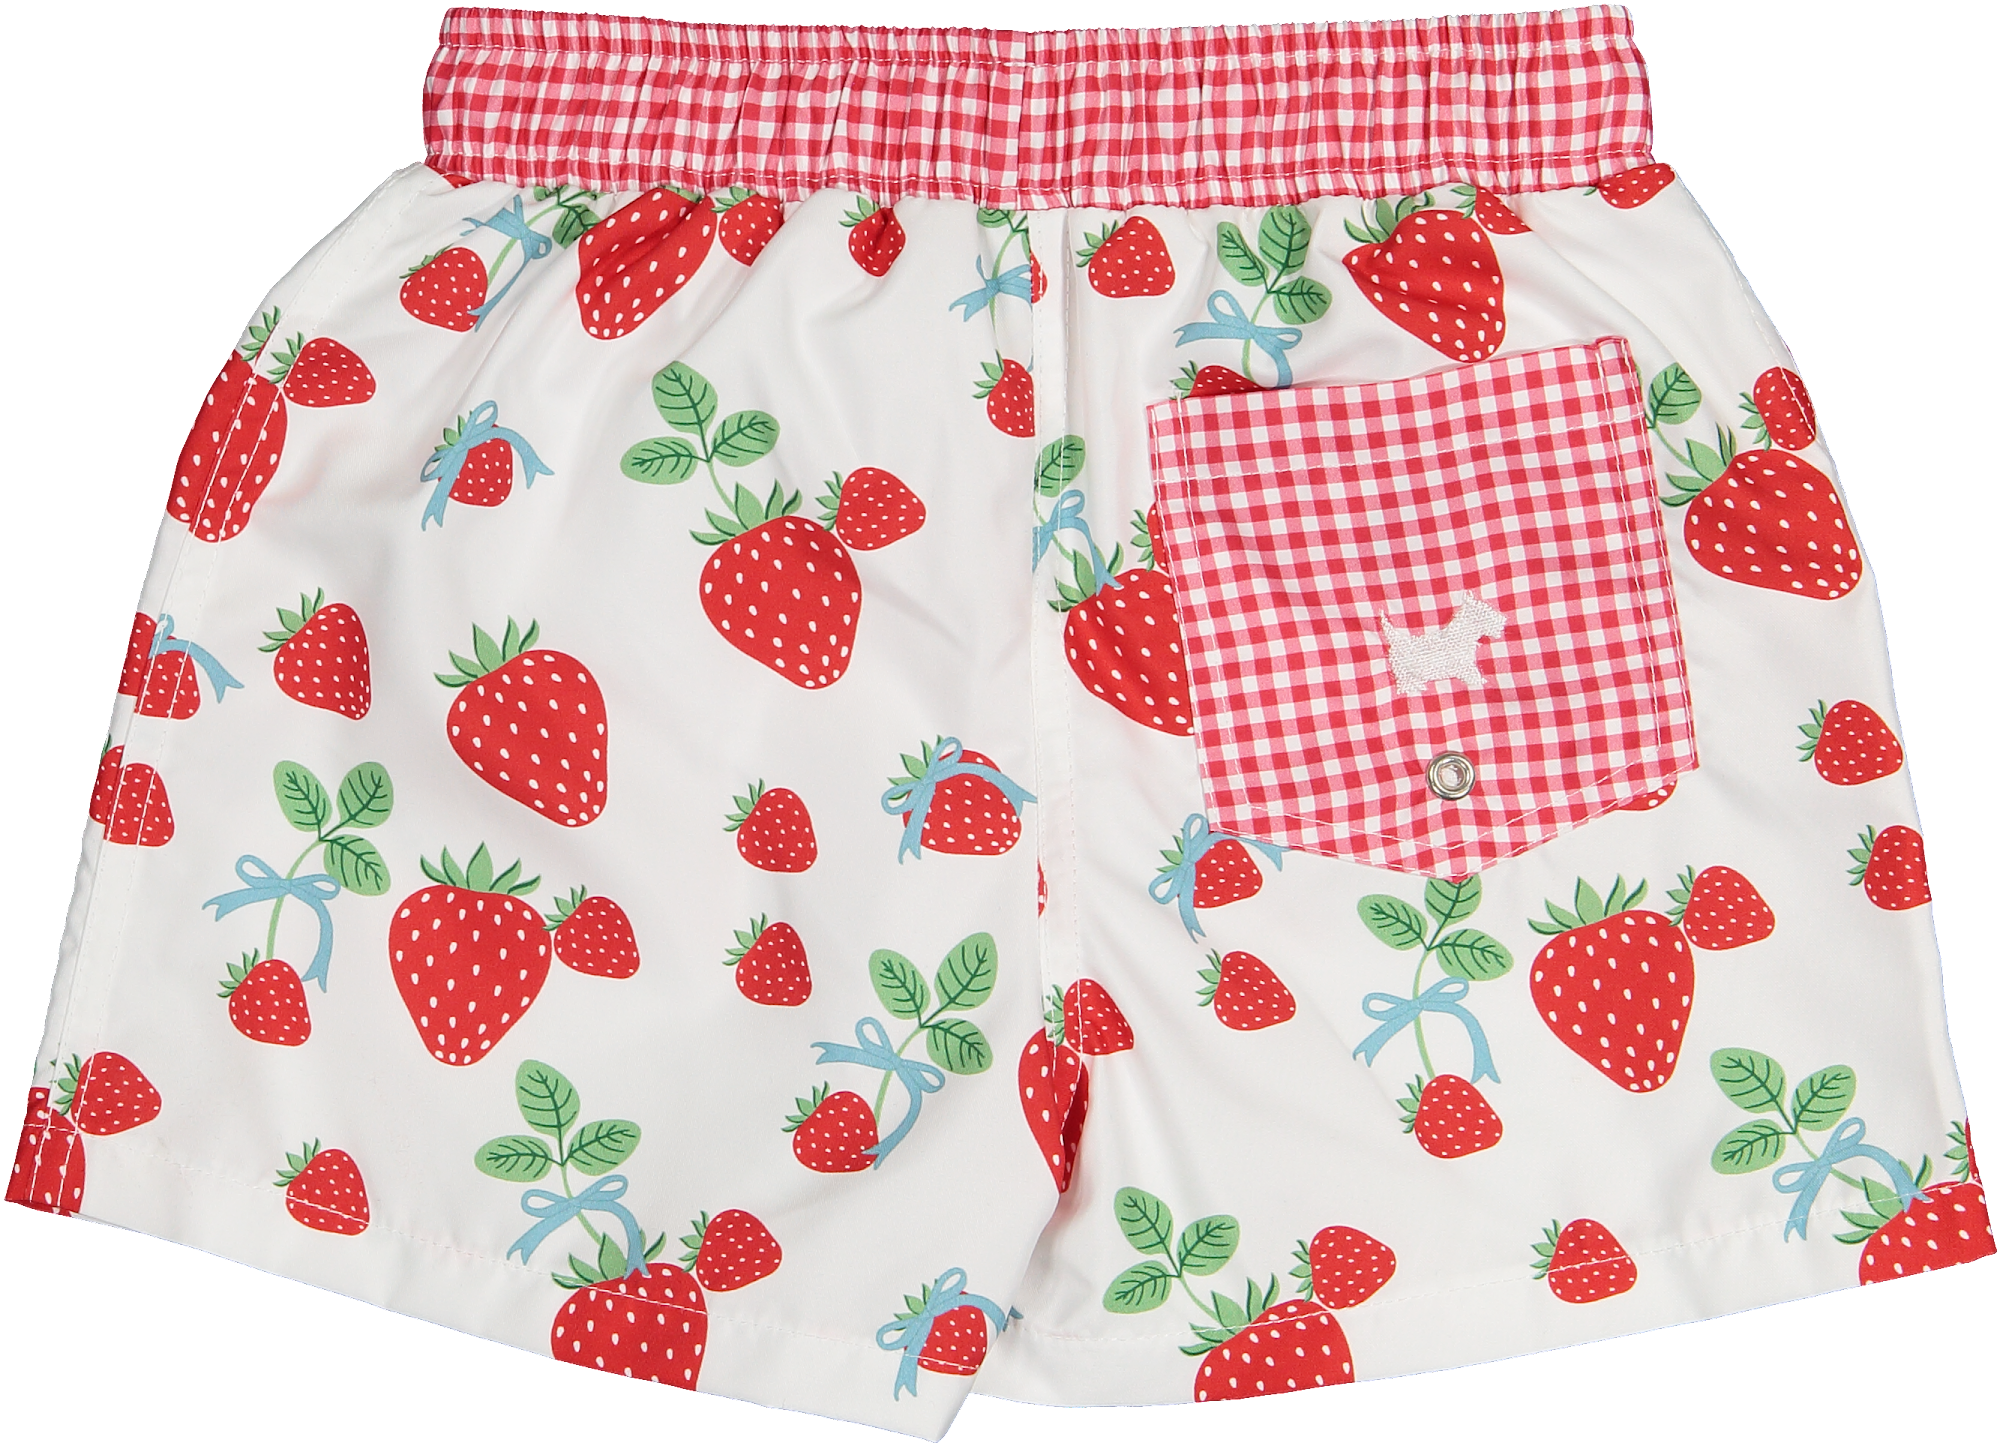 Berries and Bows Trunks